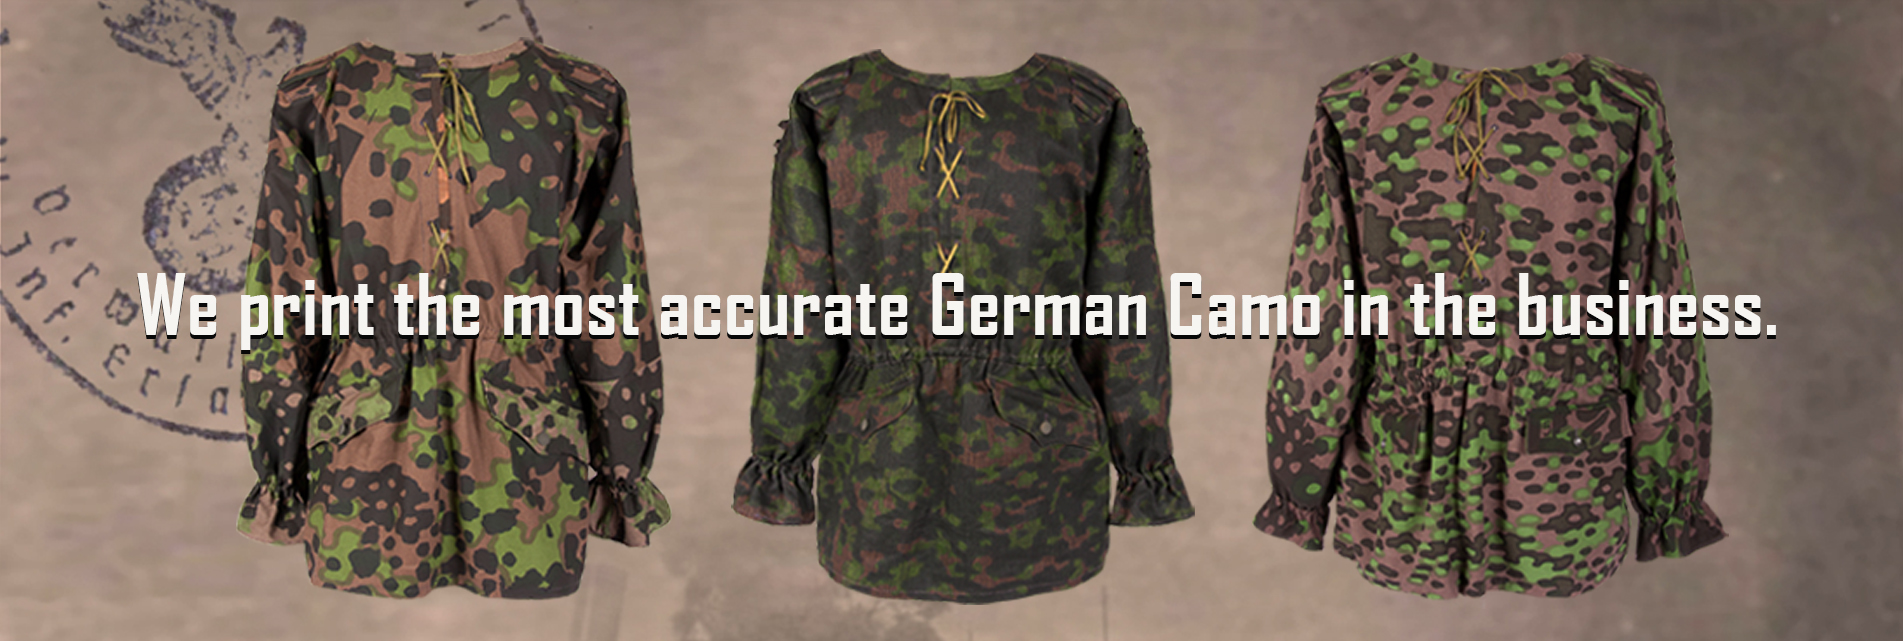 Best German Camo in the business.